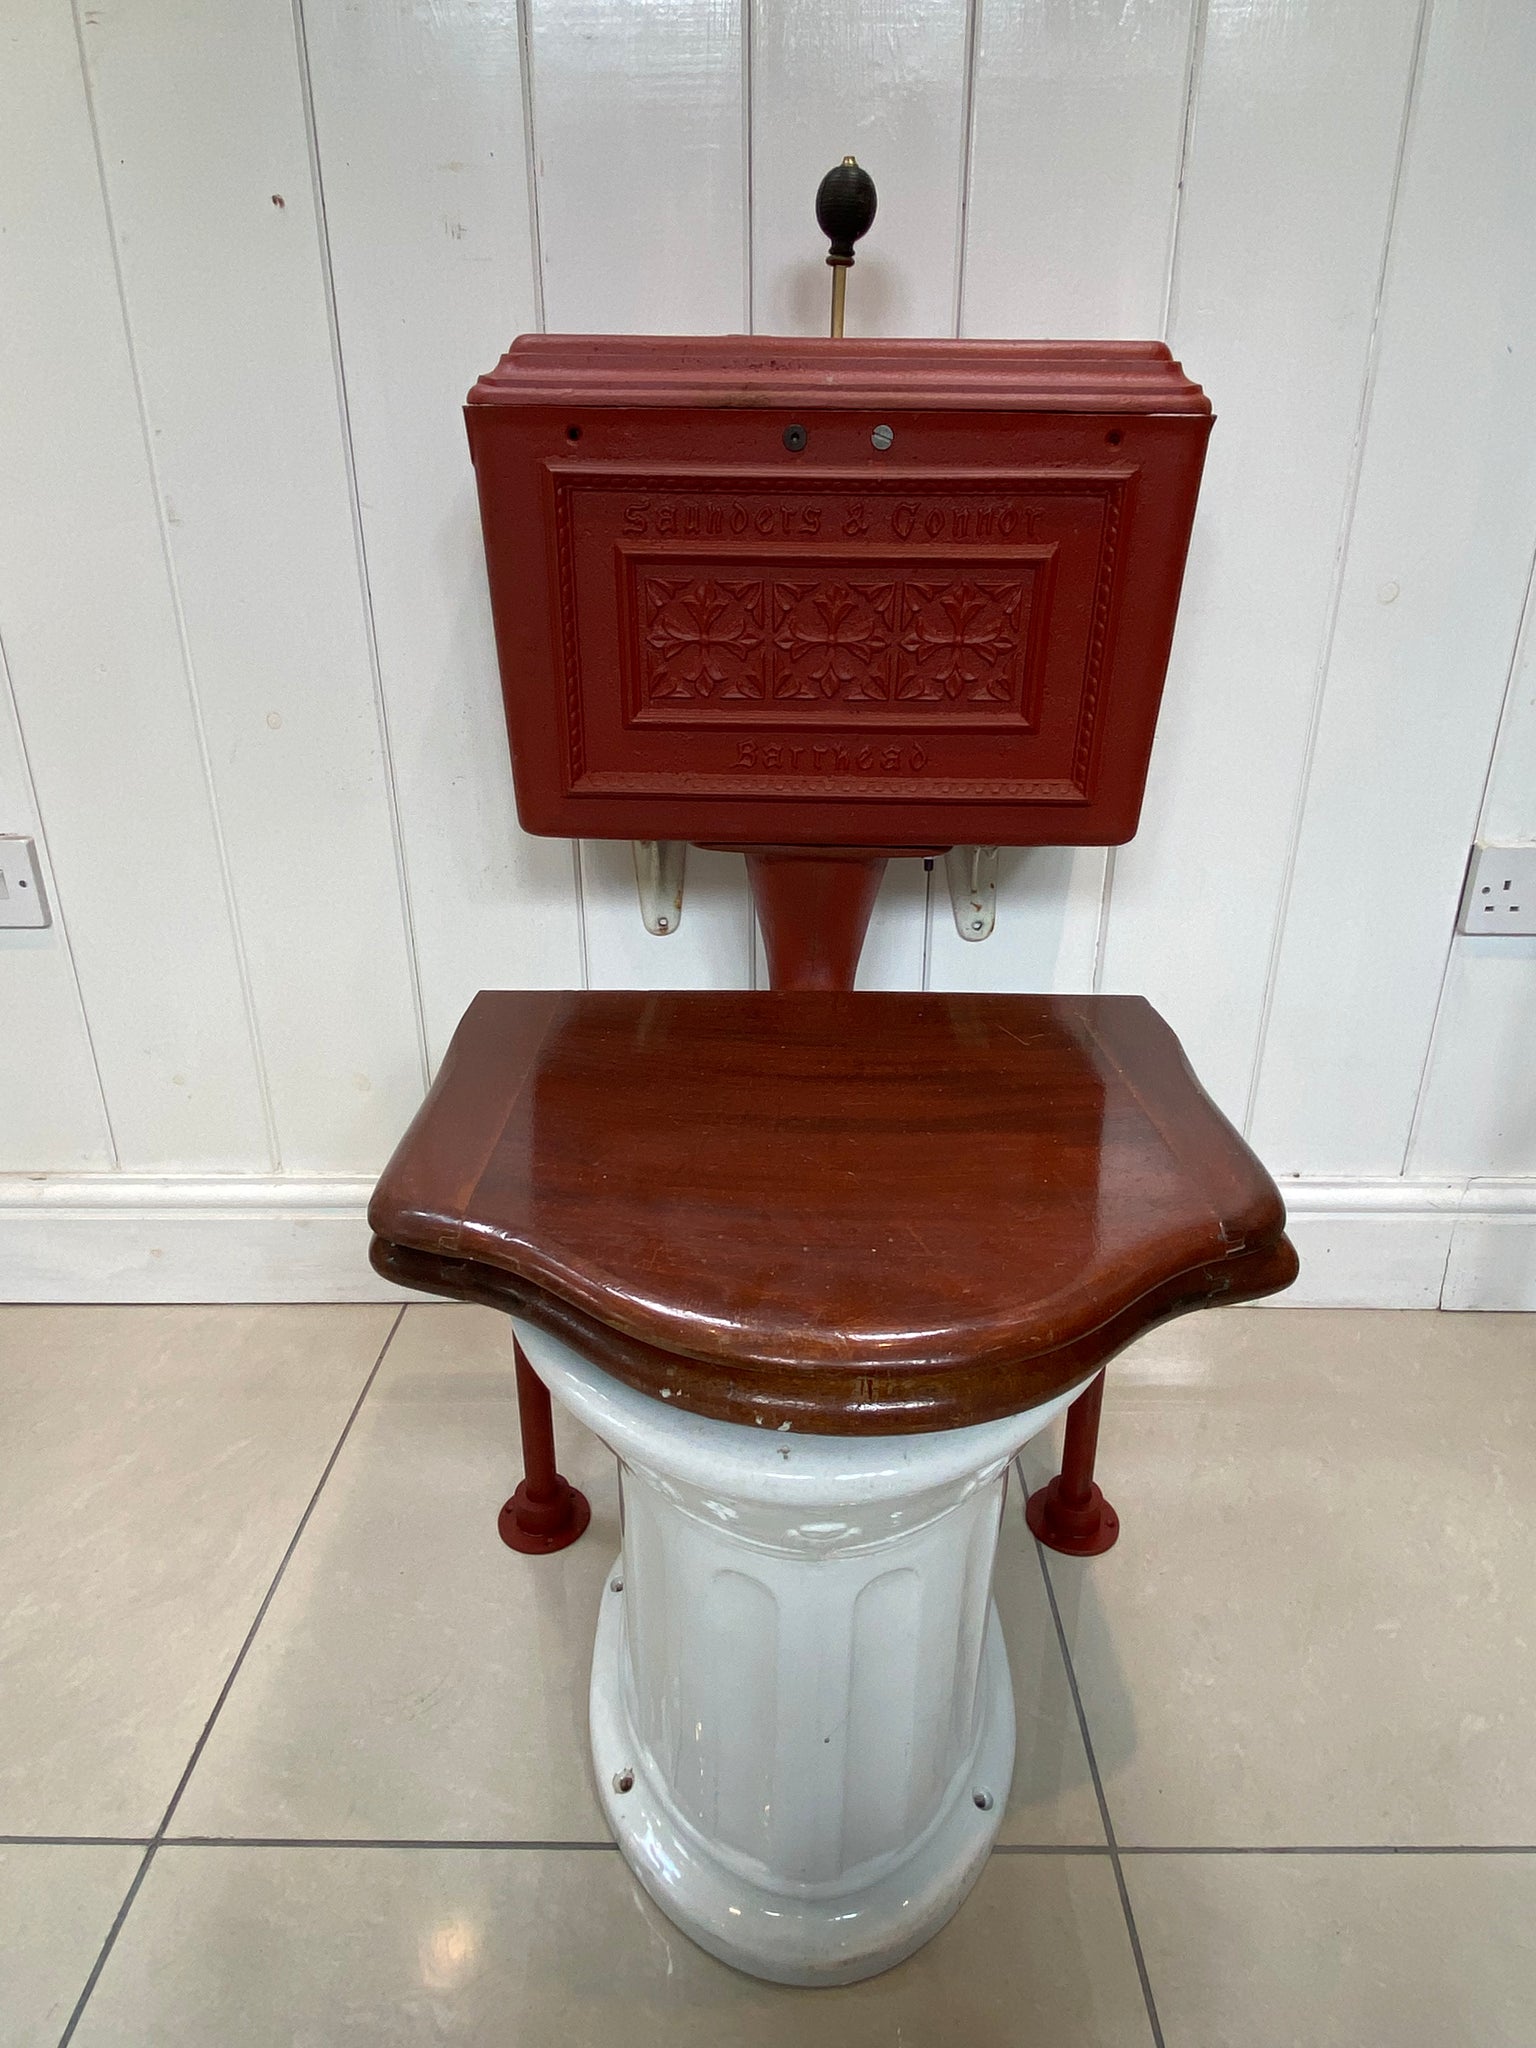 the kenwhar wc by t.c. & co. ltd (thomas crapper) priced for pan only.